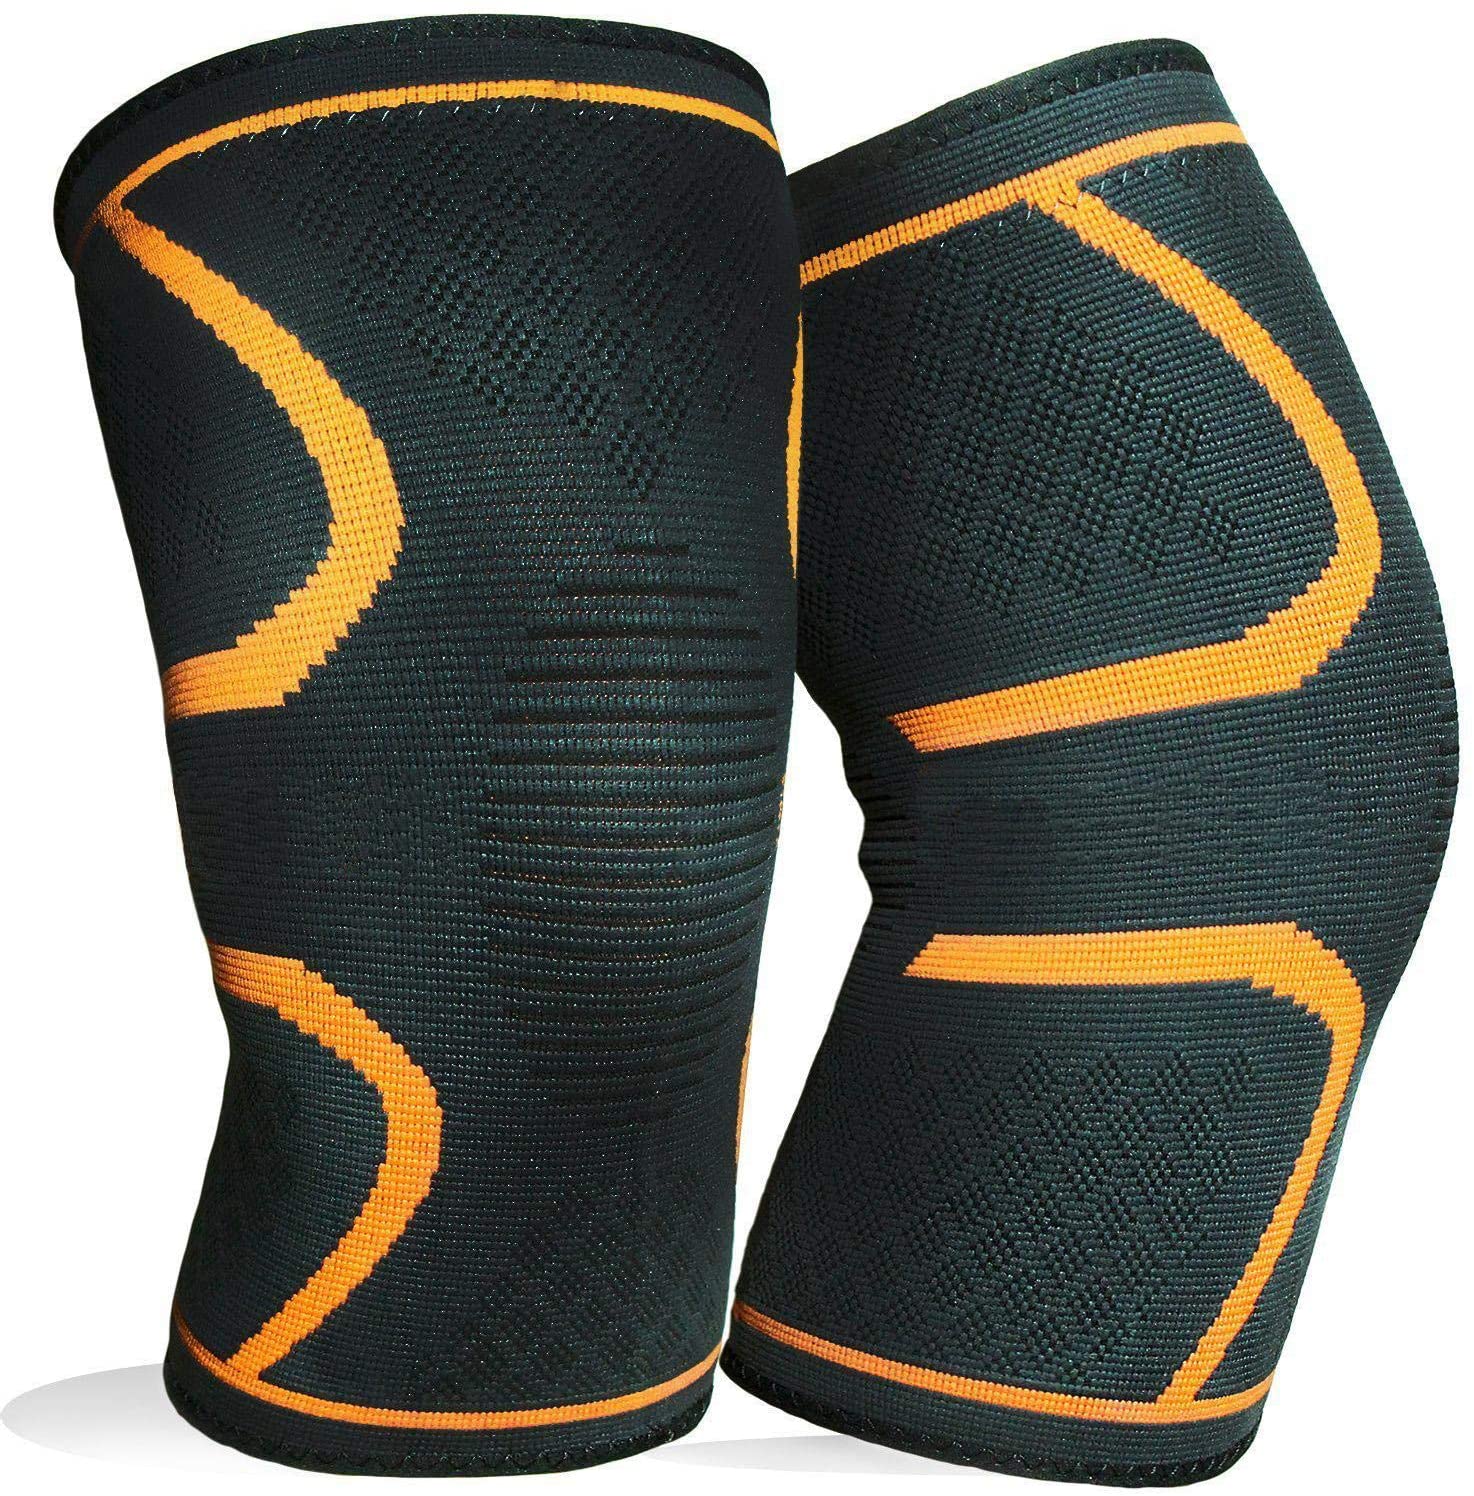 1 Pair Knee Brace Support Compression Sleeves Wraps Pads for Arthritis Running Pain Relief Injury Recovery BasketBall/FootBall